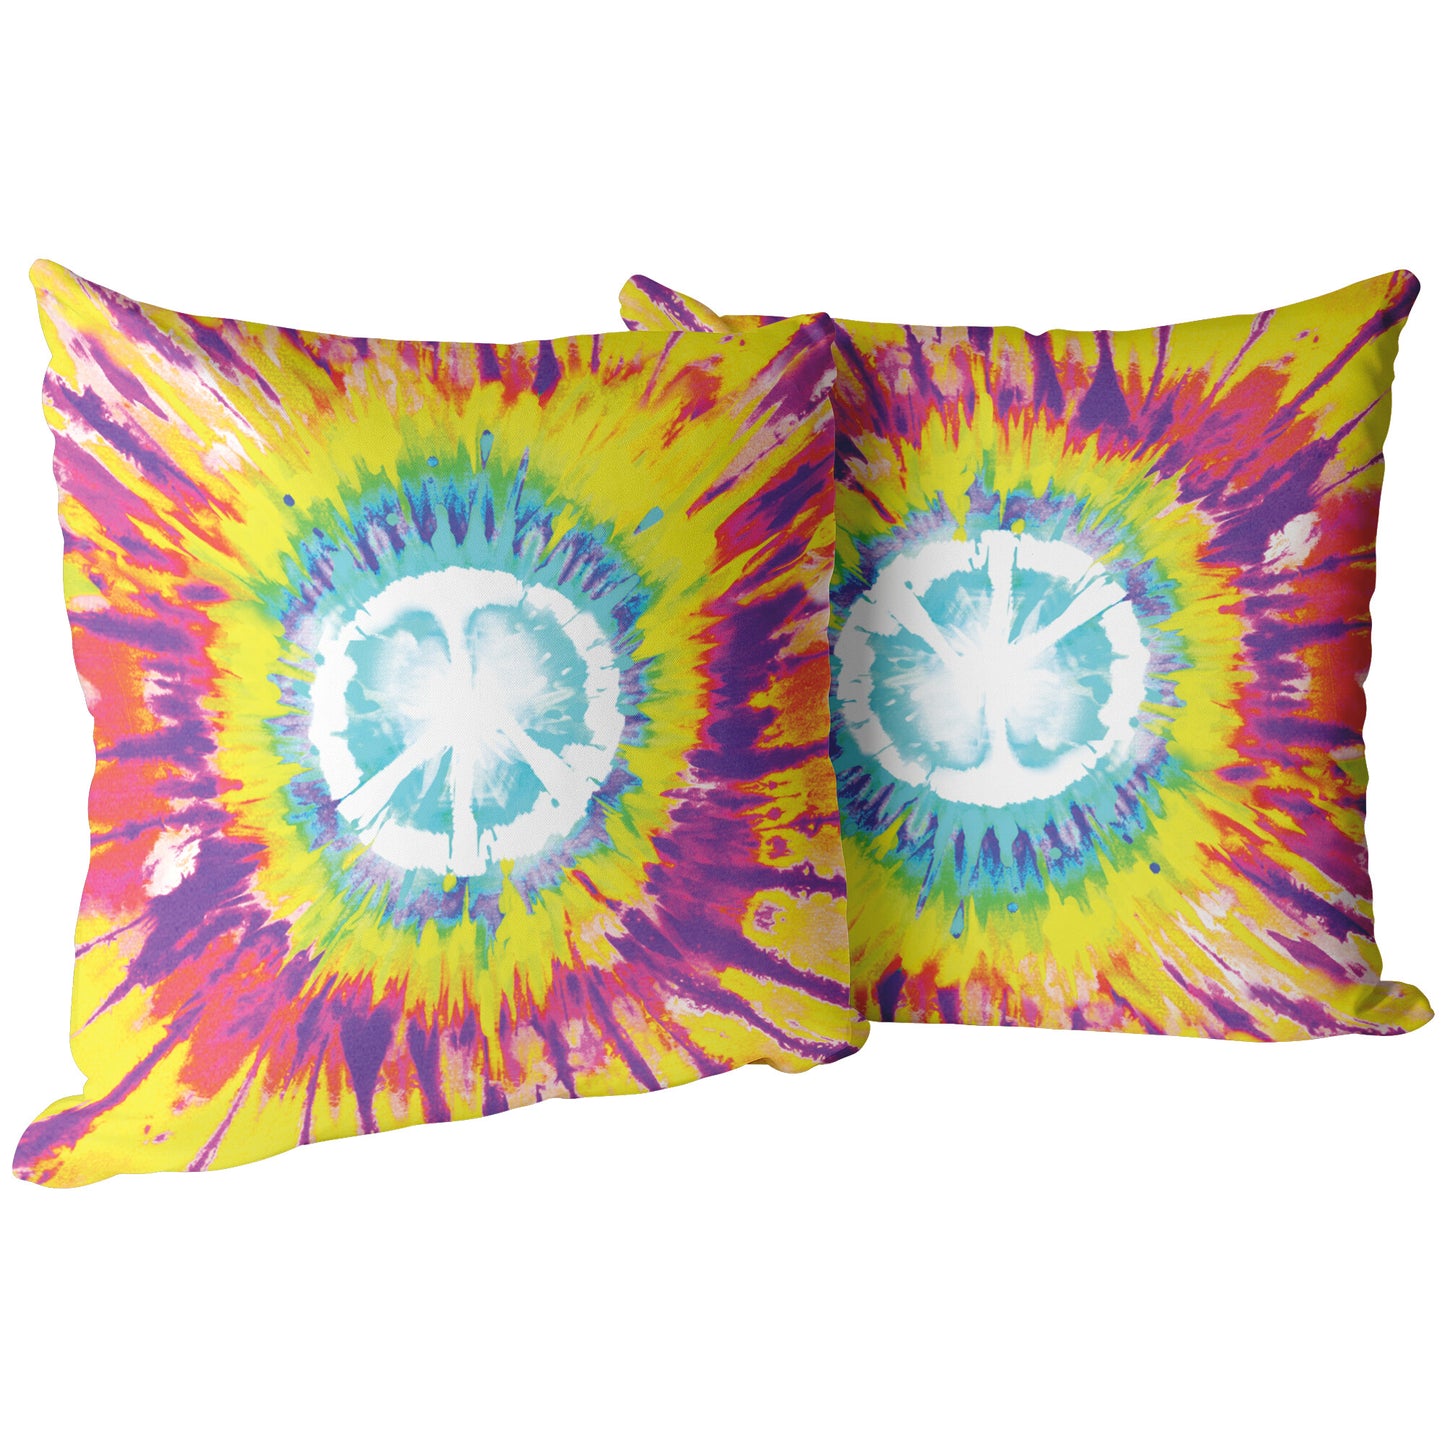 Tie Dye Pillows And Covers